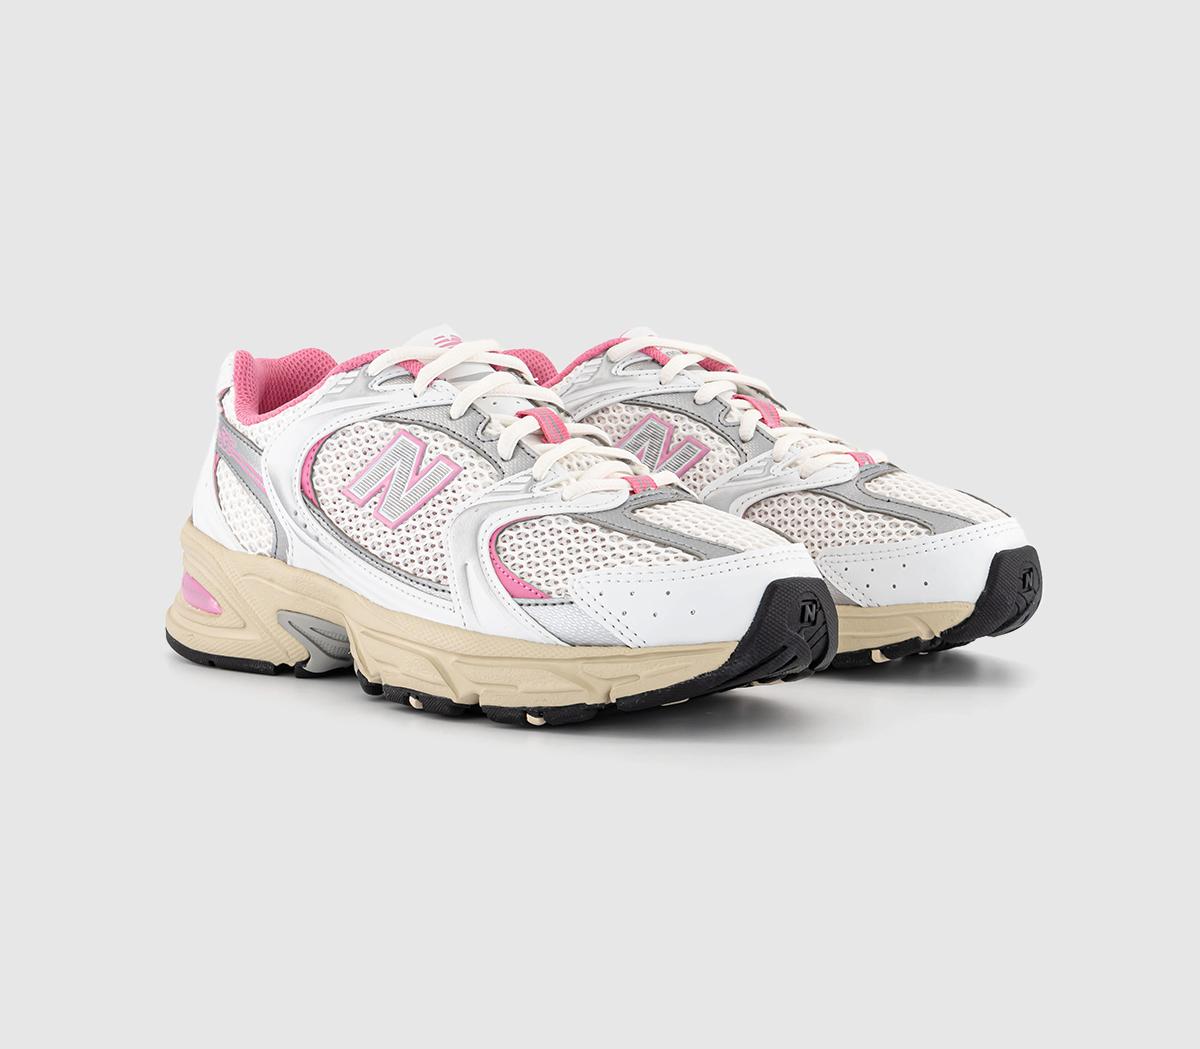 New Balance Womens Mr530 Trainers Off White Pink Silver, 5